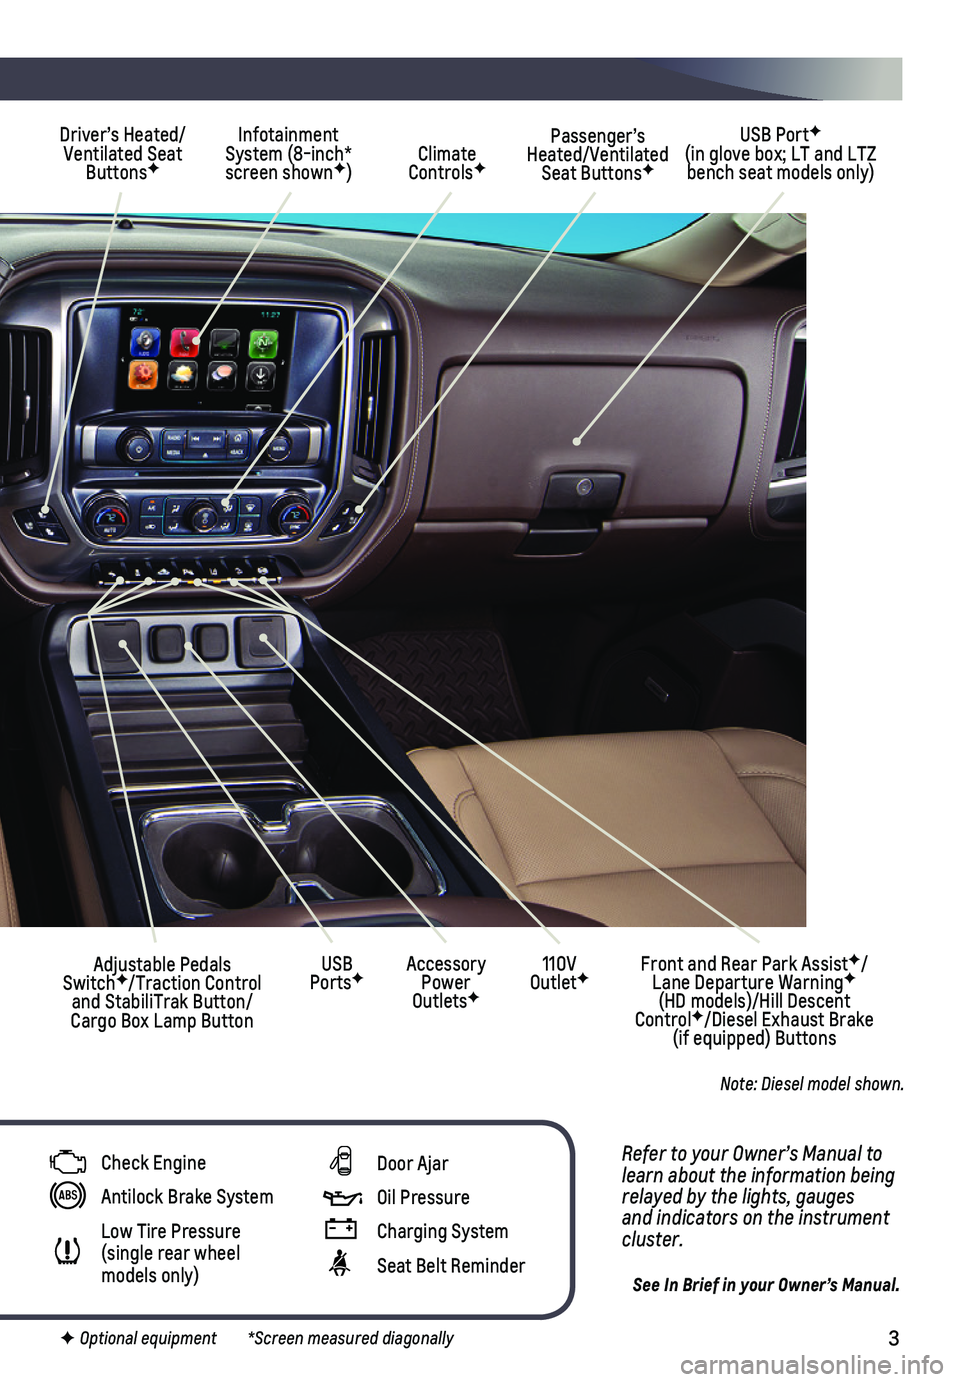 CHEVROLET SILVERADO 1500 LD 2019  Get To Know Guide 3
Refer to your Owner’s Manual to learn about the information being relayed by the lights, gauges and indicators on the instrument cluster.
See In Brief in your Owner’s Manual.
Driver’s Heated/V